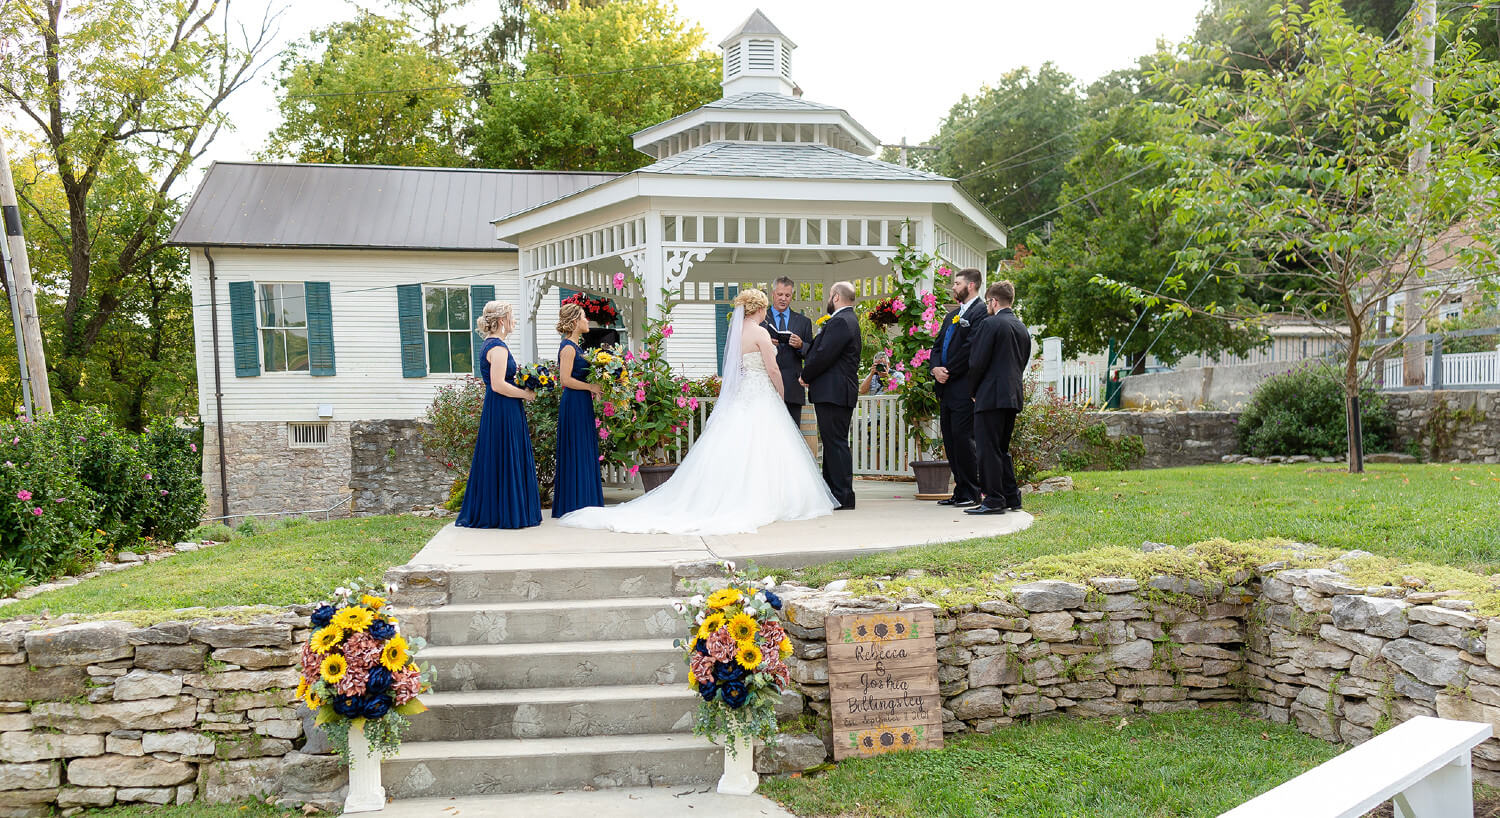 Sunflower arrangements in pots by steps leading up to white gazebo in distance with bride and groom exchanging vows with bridal party on each side.